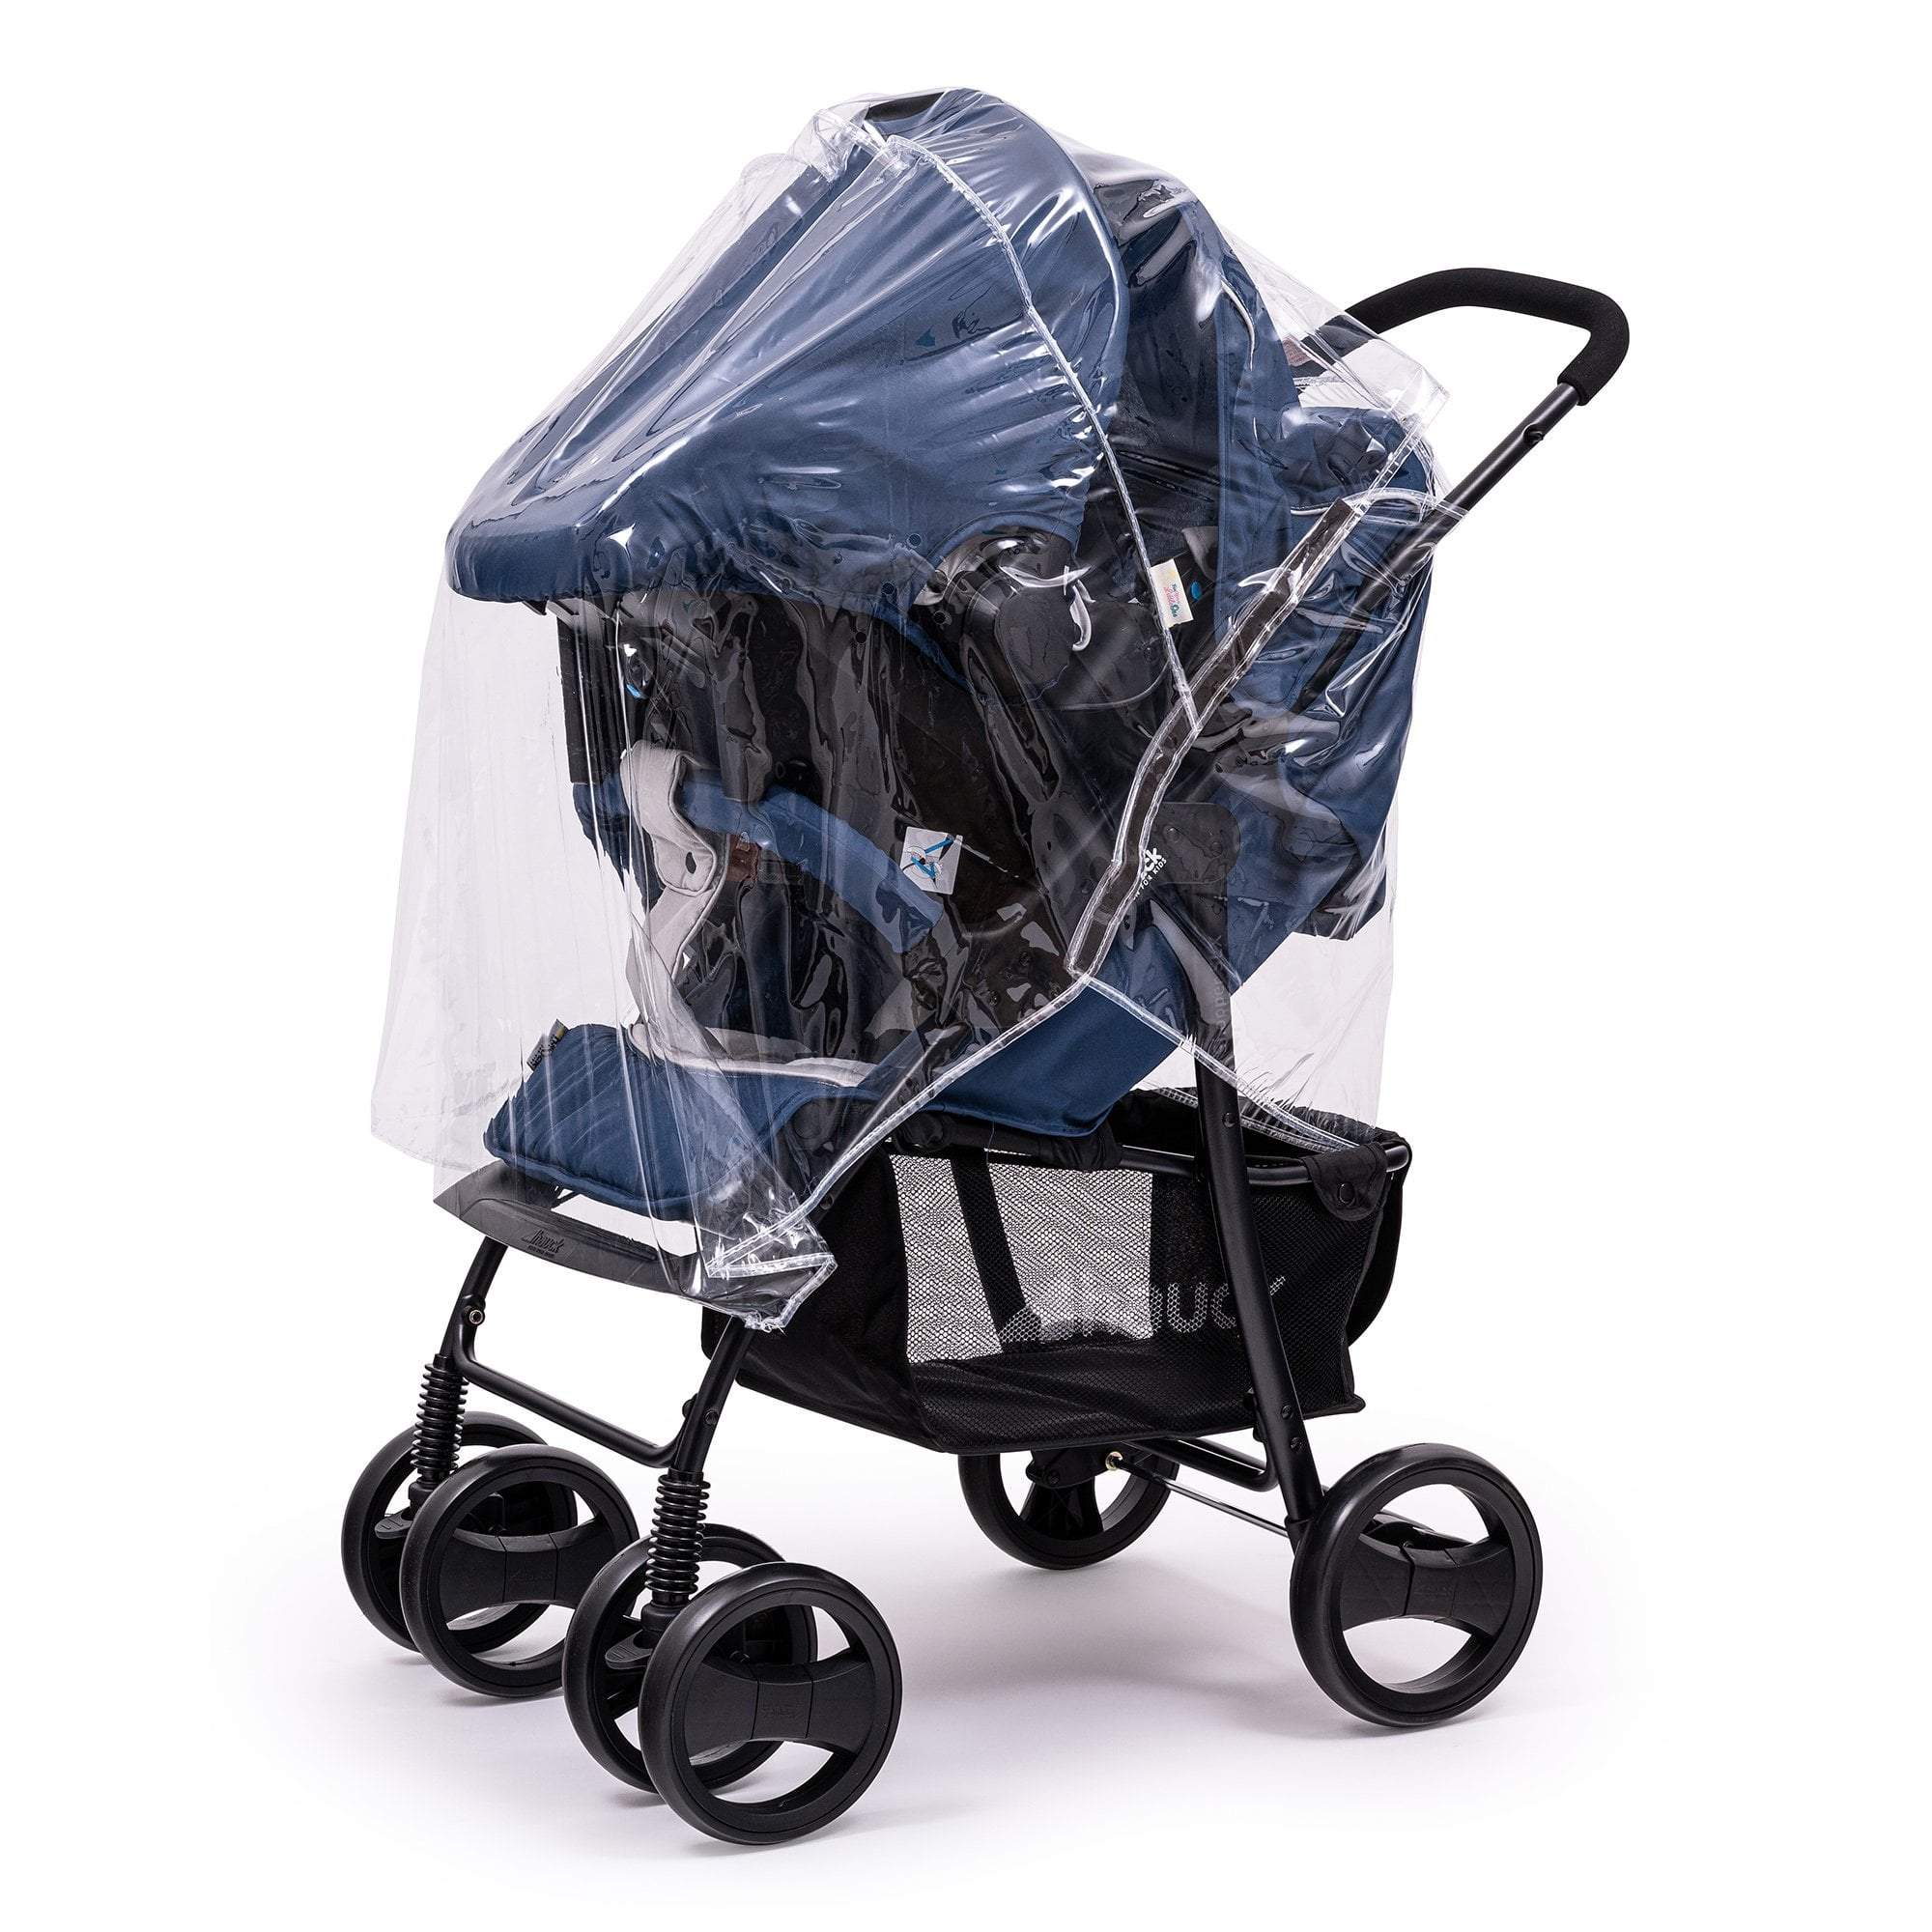 Travel System Raincover Compatible with Zeta - Fits All Models - For Your Little One